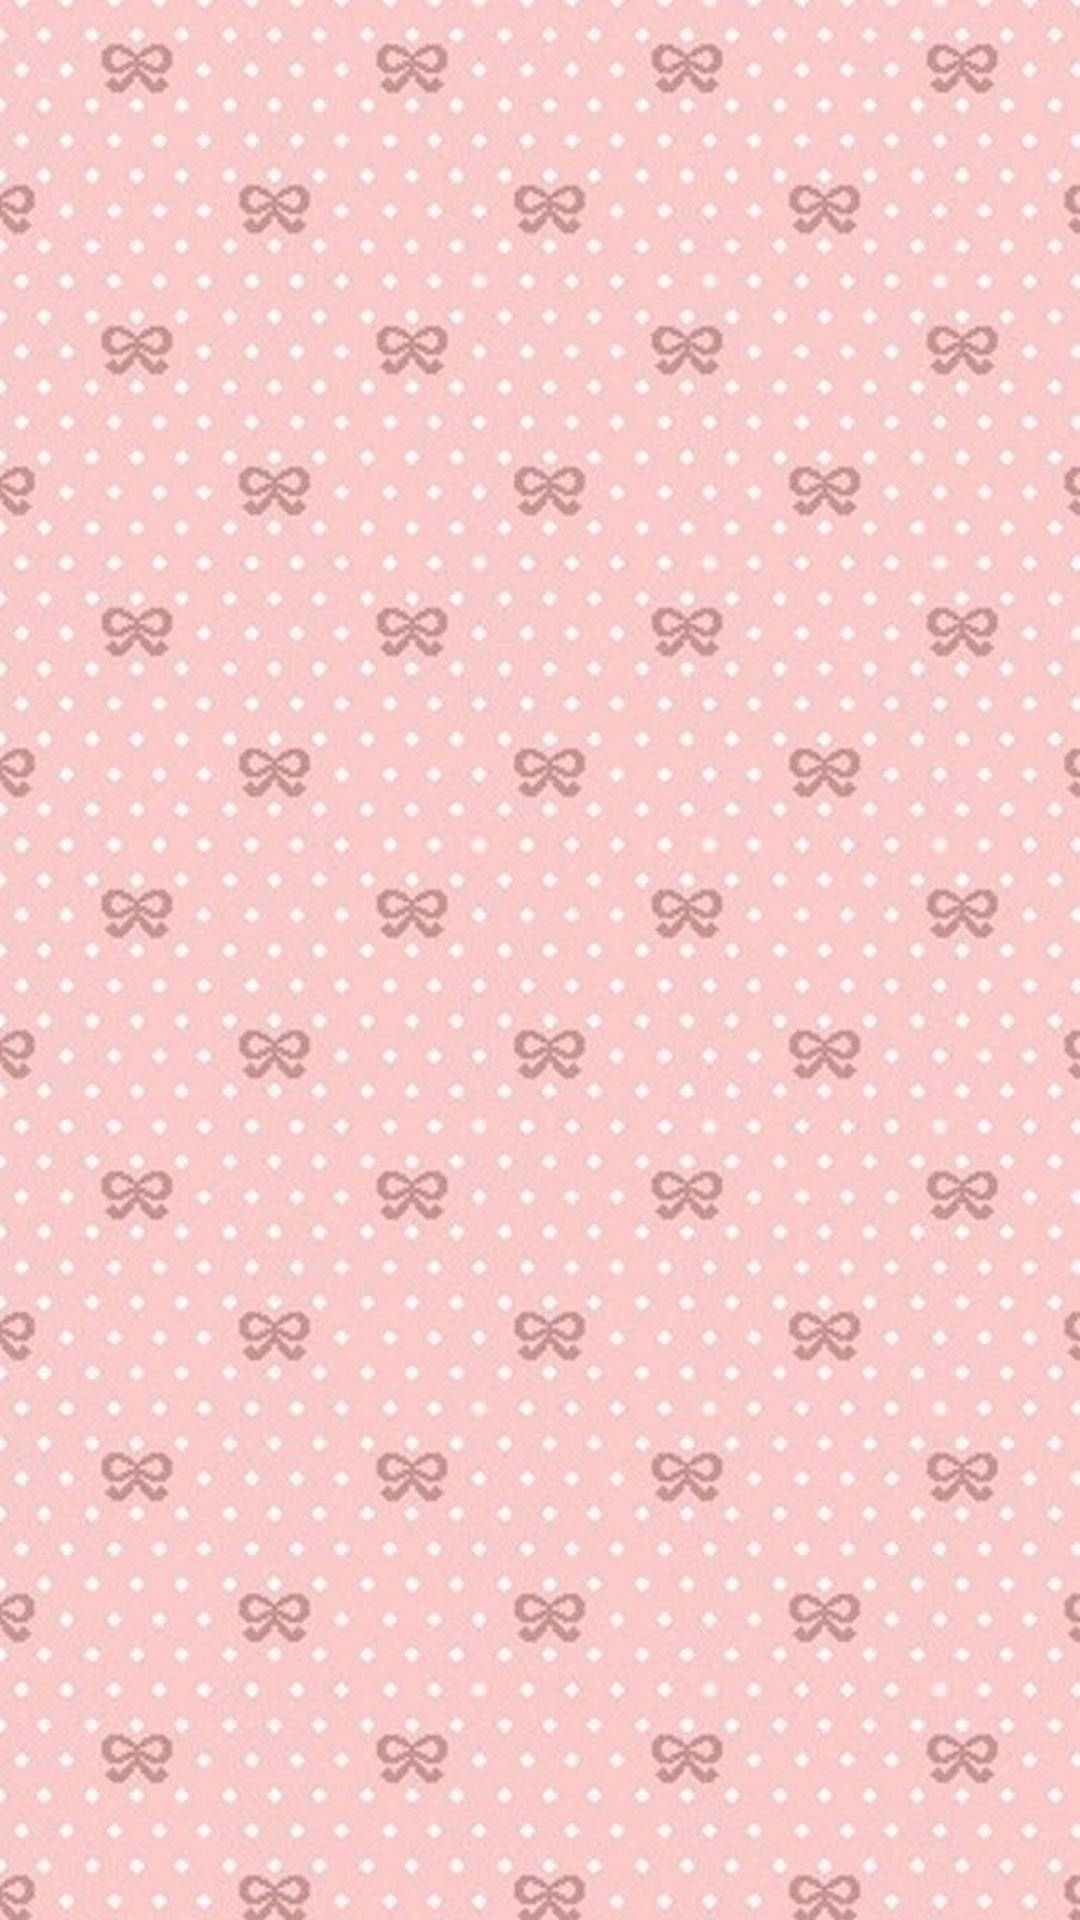 Cute And Pink Small Ribbon Patterns Backdrop Background